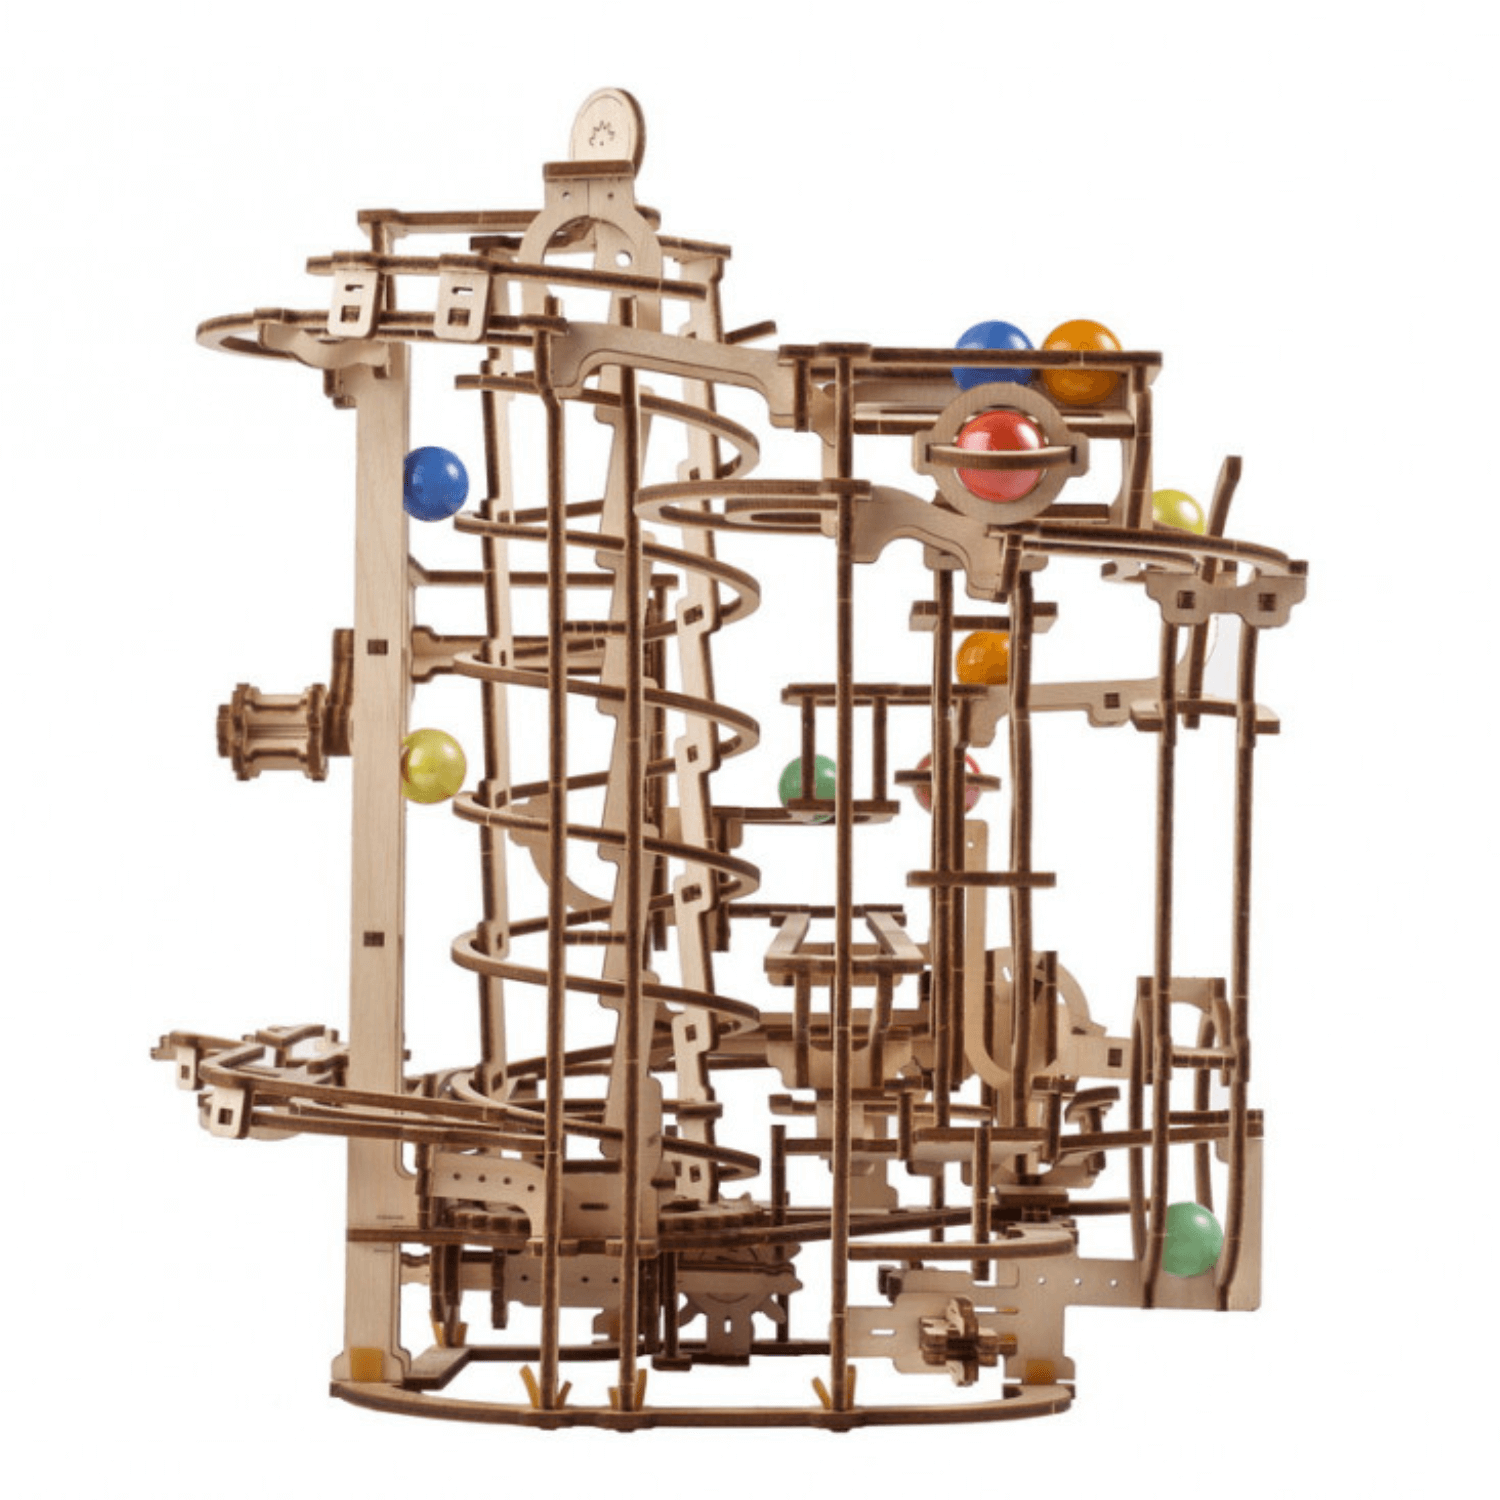 Marble run with spiral elevator